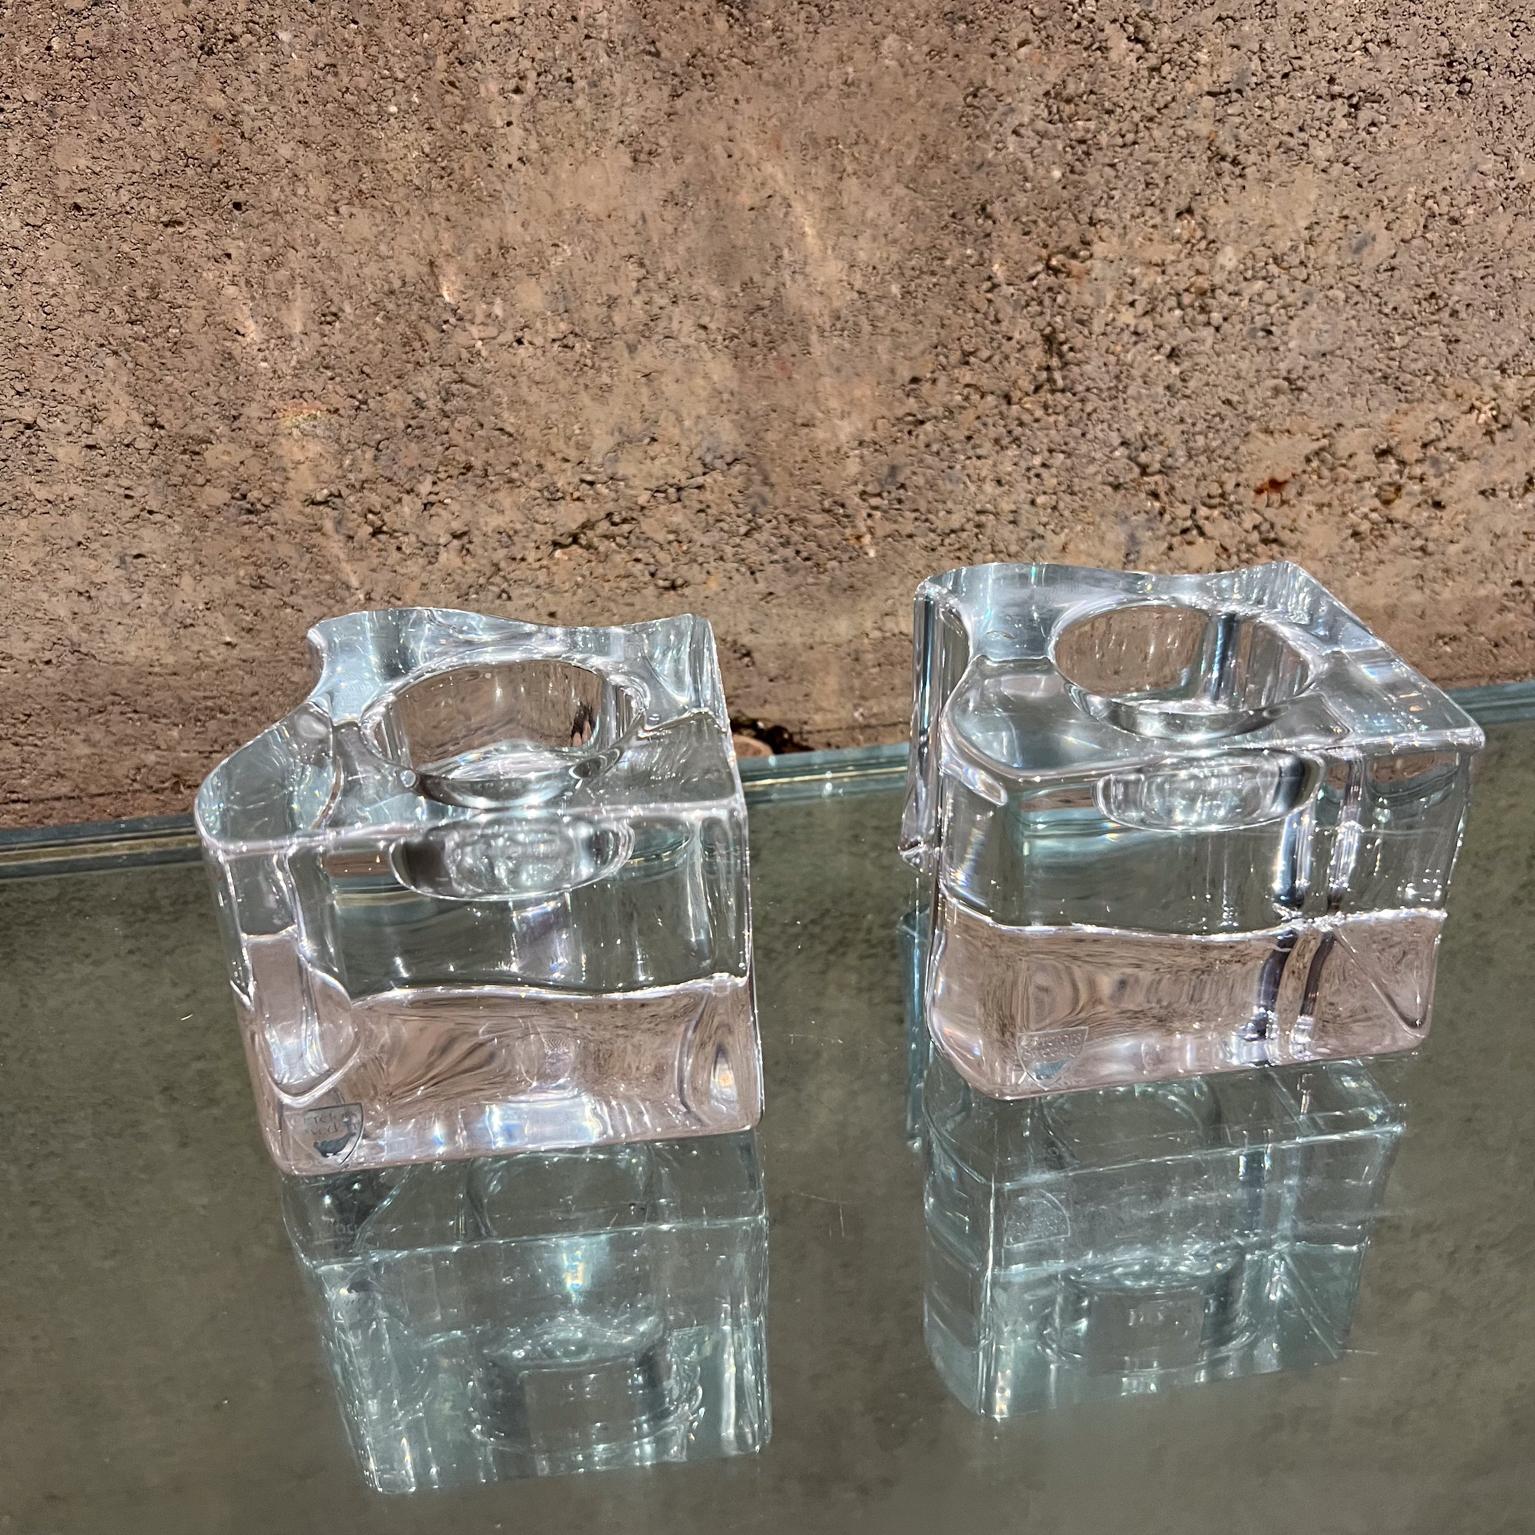 
1960s Pair Orrefors Candle Holder Square Crystal Glass
2.5 h x 3.13 x 2.88
Preowned vintage unrestored condition, please see images provided.